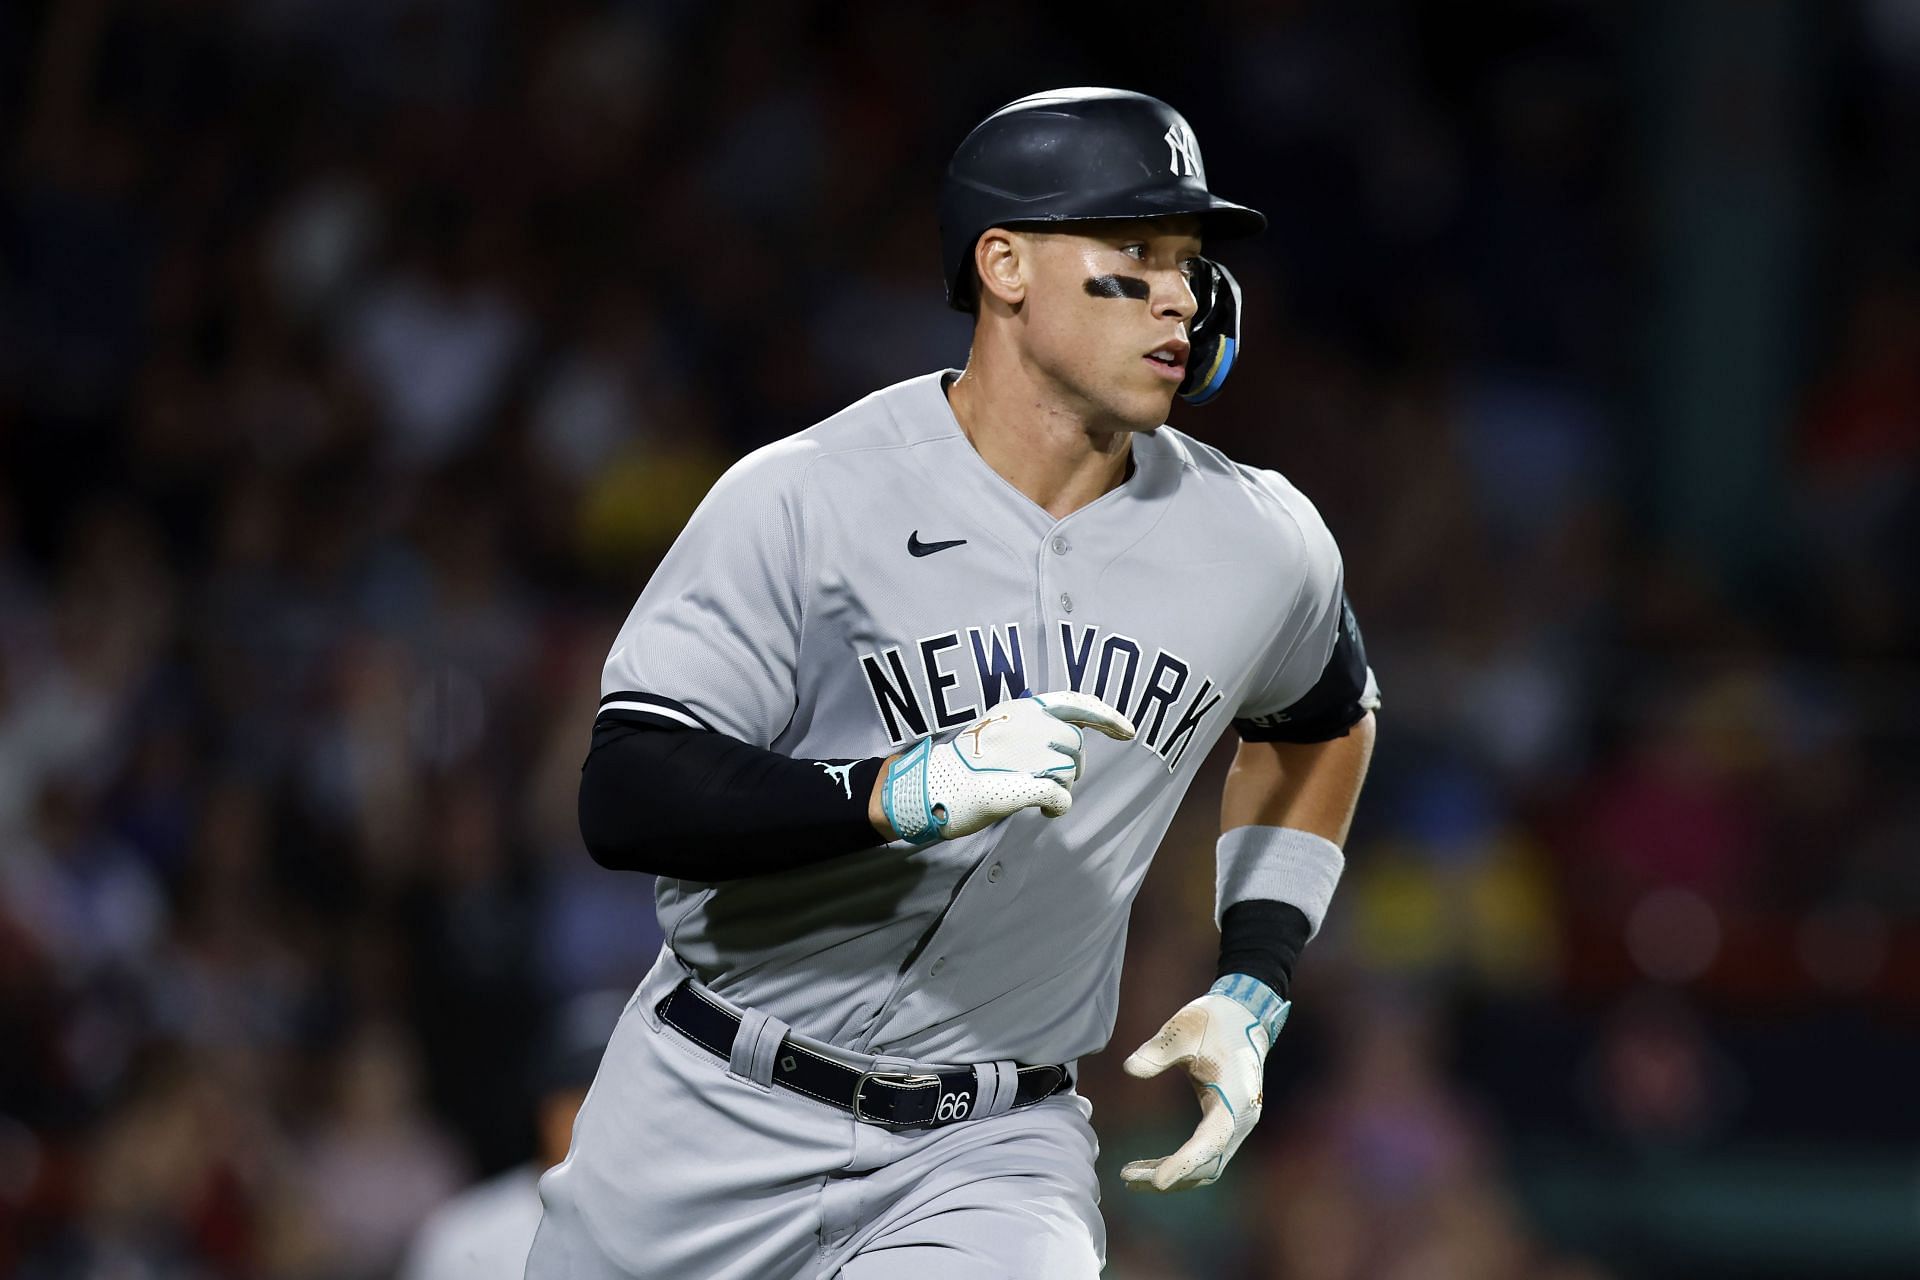 Yankees MVP Aaron Judge reflects on donning the iconic pinstripes in epic  rivalry at Fenway following series win - You can't beat it